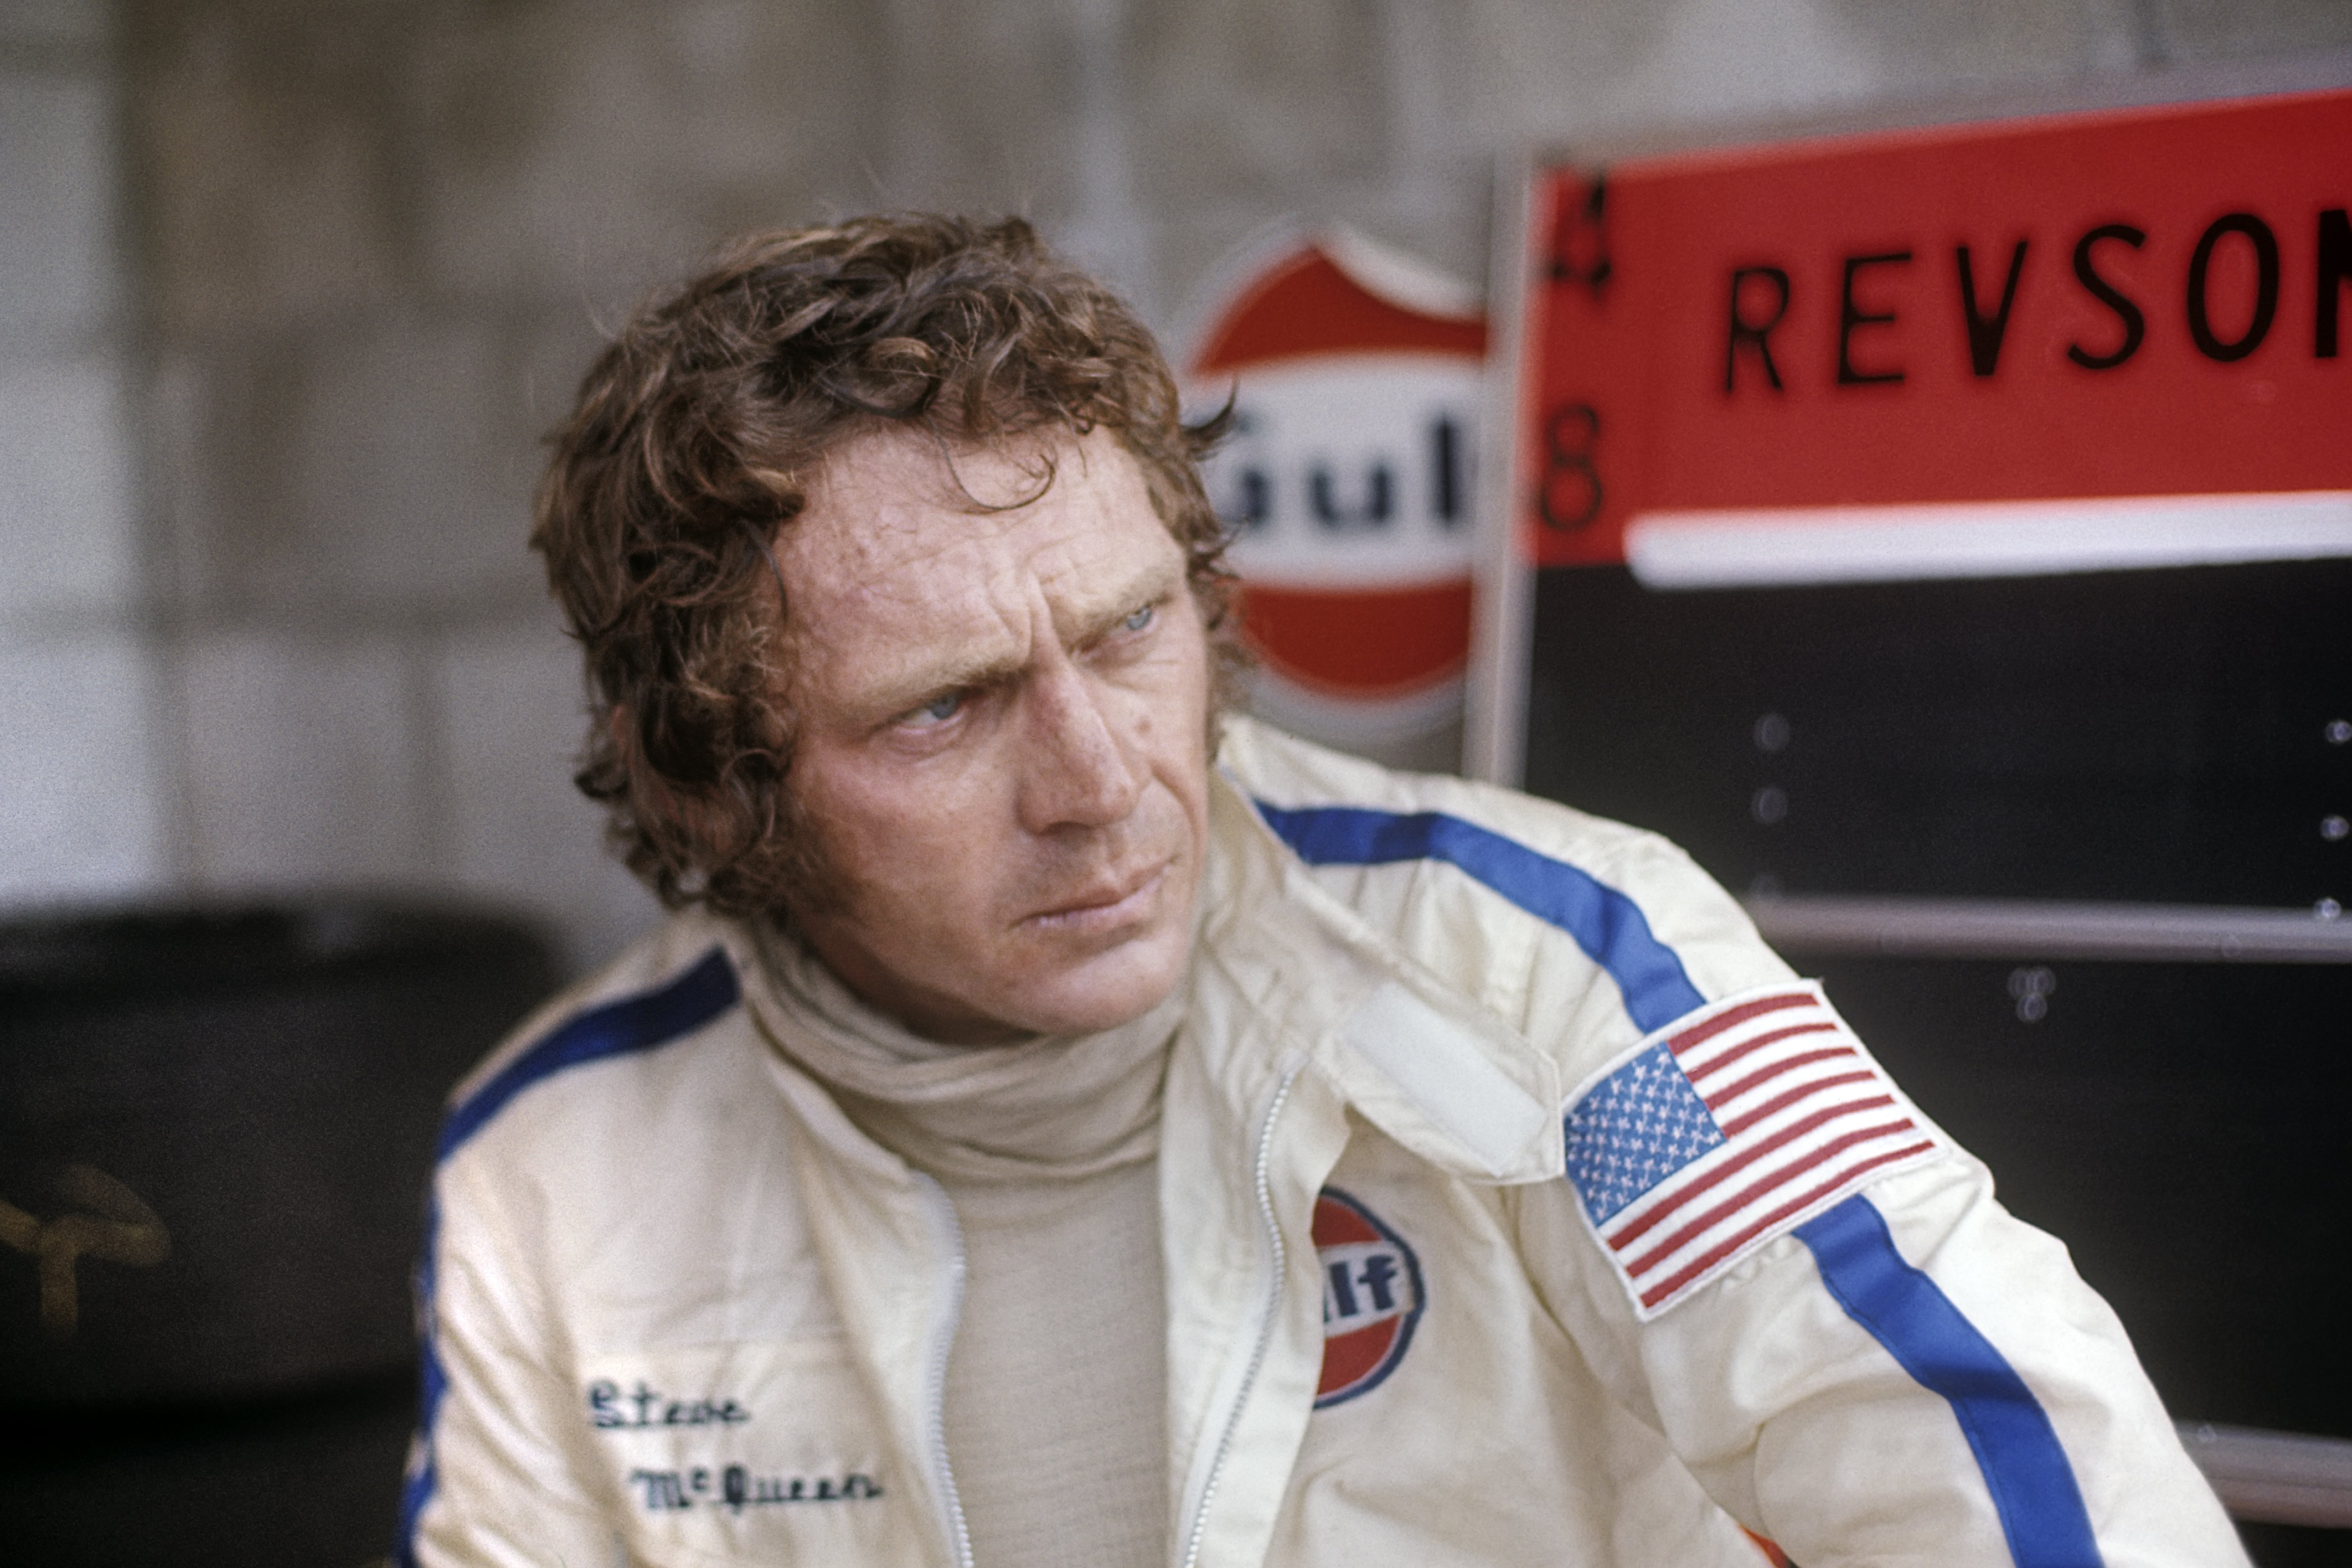 Steve McQueen during the 12 Hours of Sebring race in 1970. | Source: Getty Images